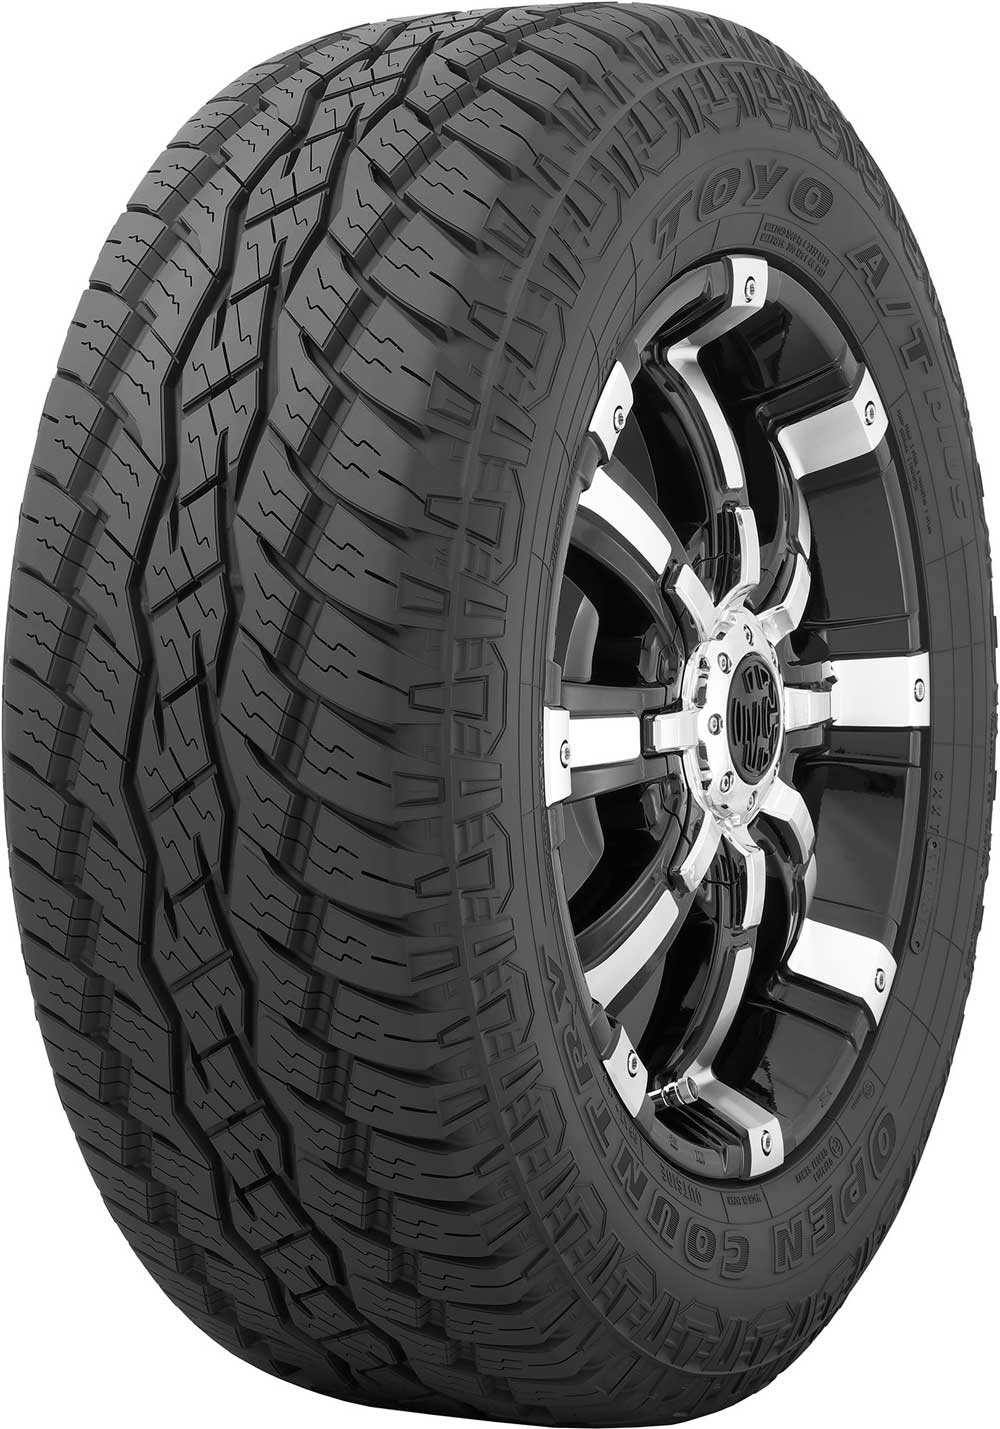 Гуми за джип TOYO OPEN CONTRY A/T+ 175/80 R16 91S